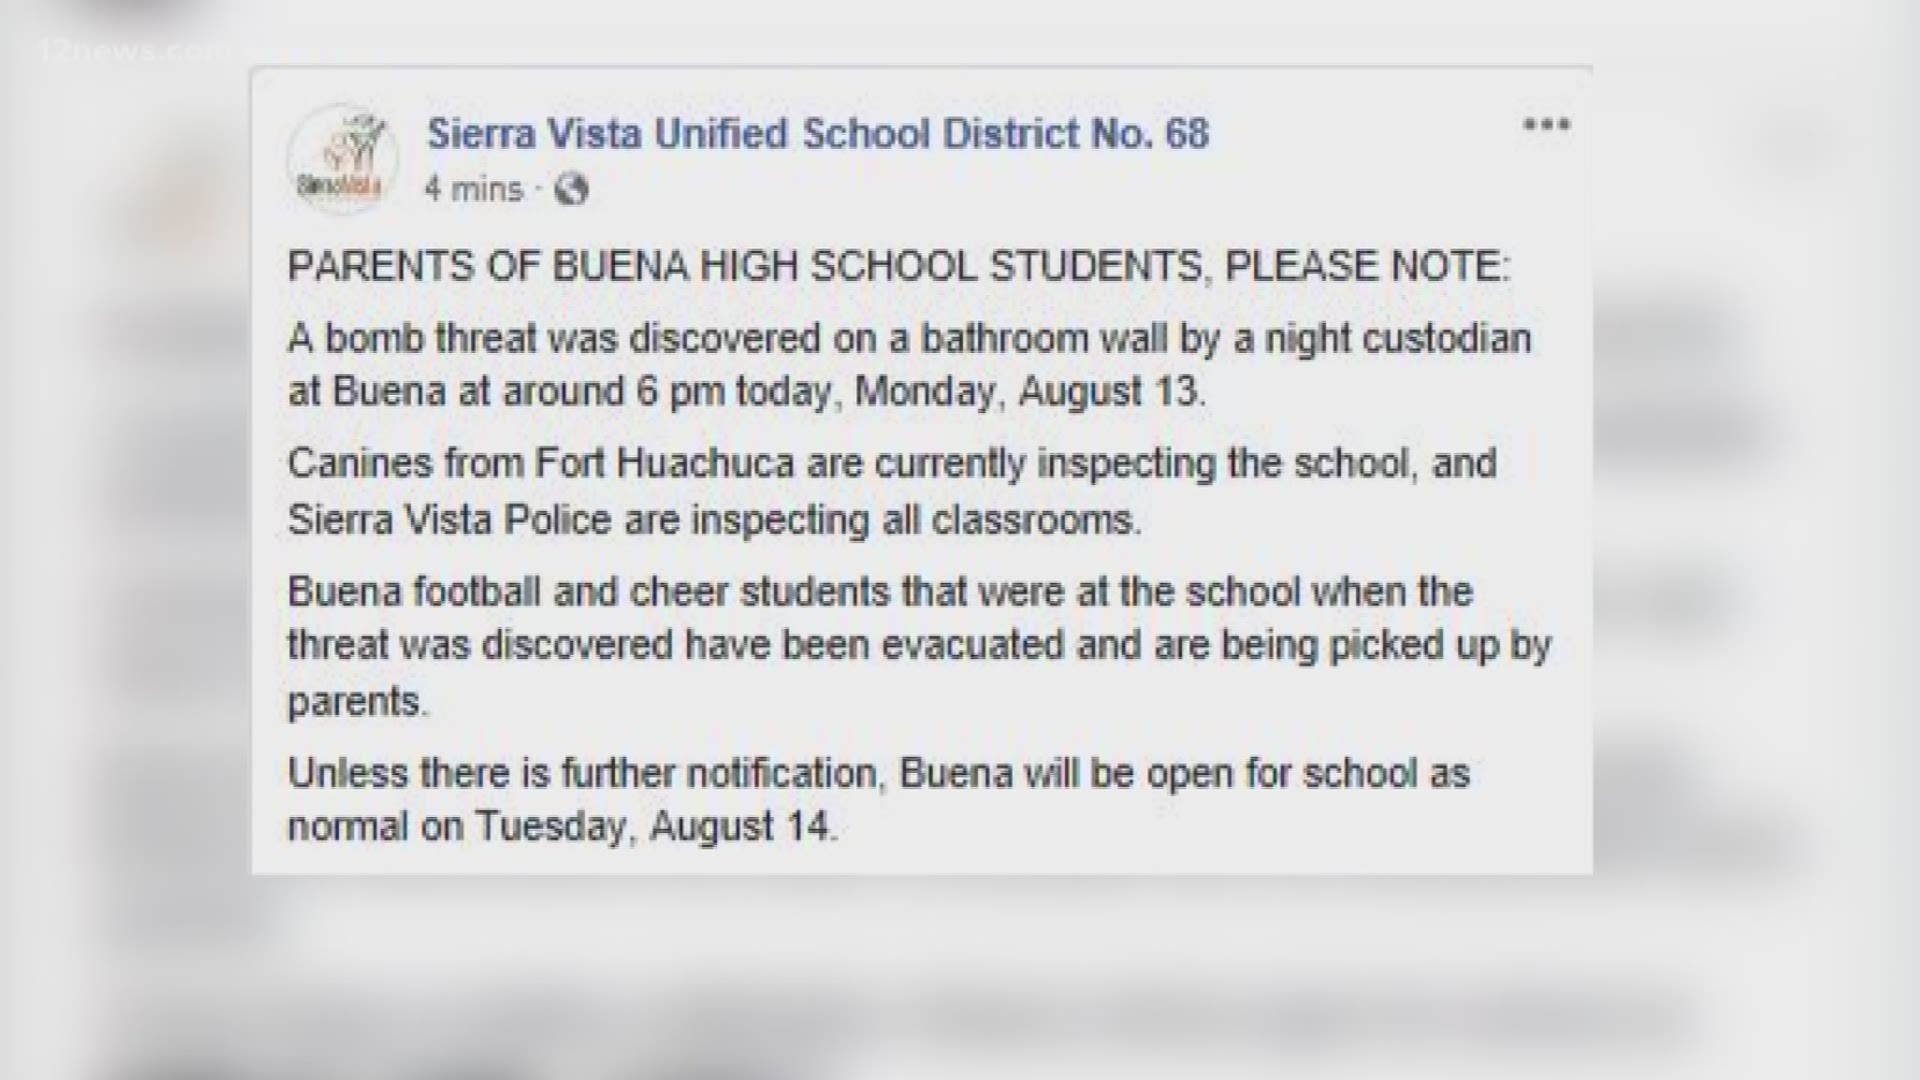 A bomb threat was discovered written on a bathroom wall at Buena High School in Sierra Vista. Bomb sniffing dogs have been called in to investigate the threat.